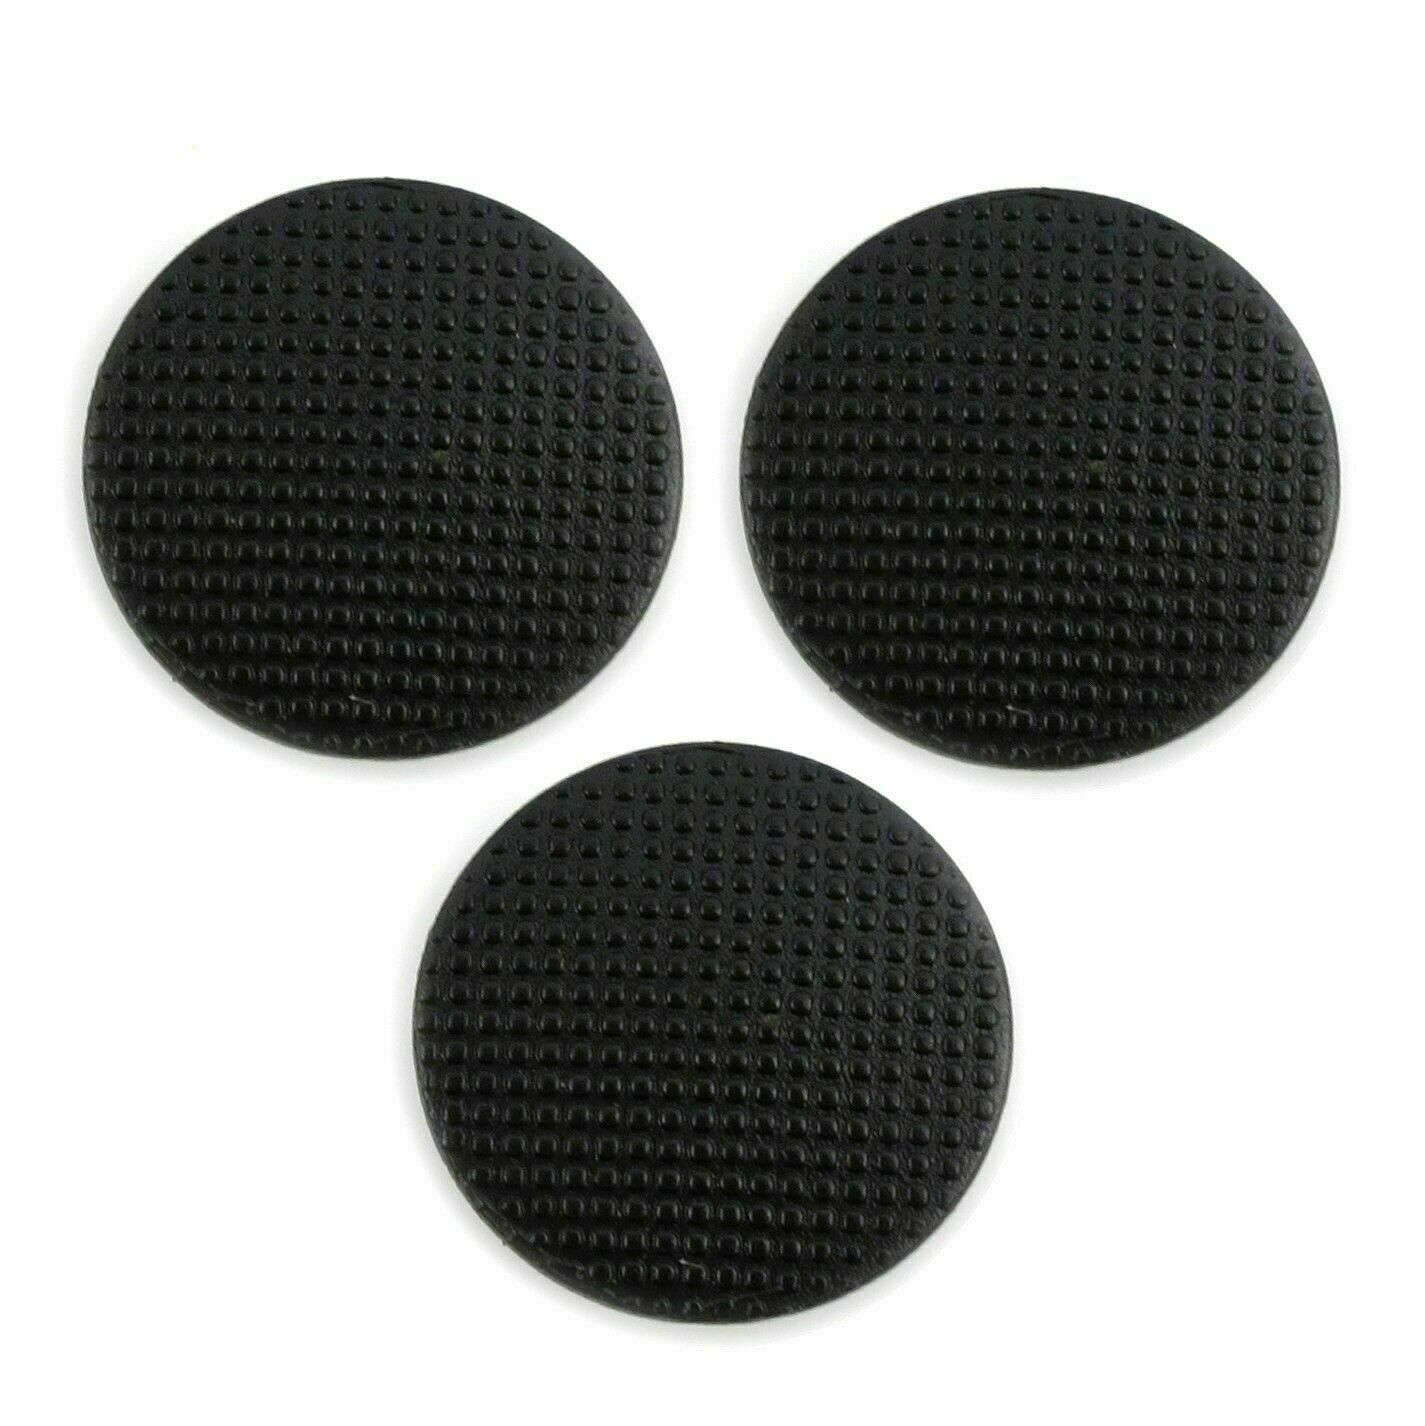 3Pcs Black Analog Joystick Stick Cap Cover Thumb Button For PSP 1000 1001 Unbranded Does not apply